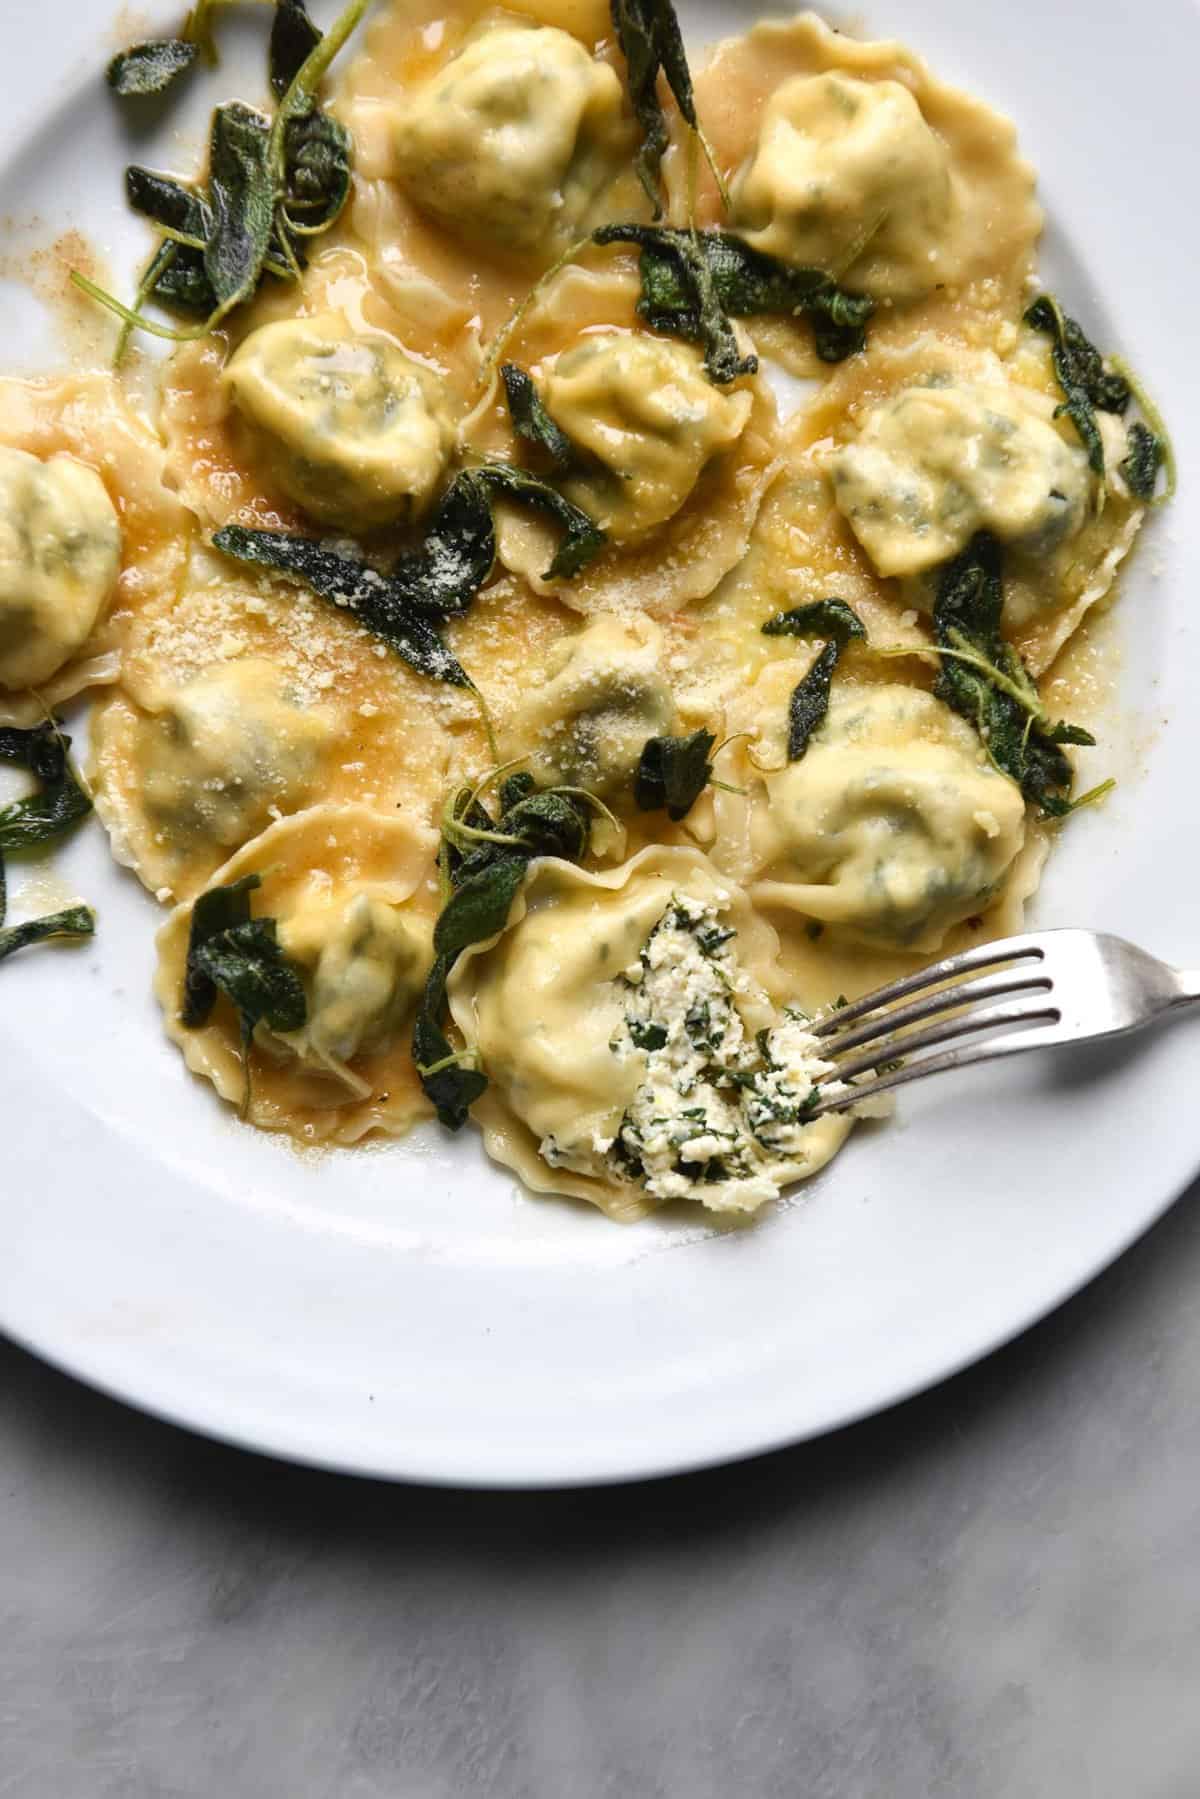 Homemade gluten free ravioli with lactose free ricotta and spinach filling and a brown butter crispy sage topping. FODMAP friendly, nut free, gluten free and vegetarian. Recipe from www.georgeats.com